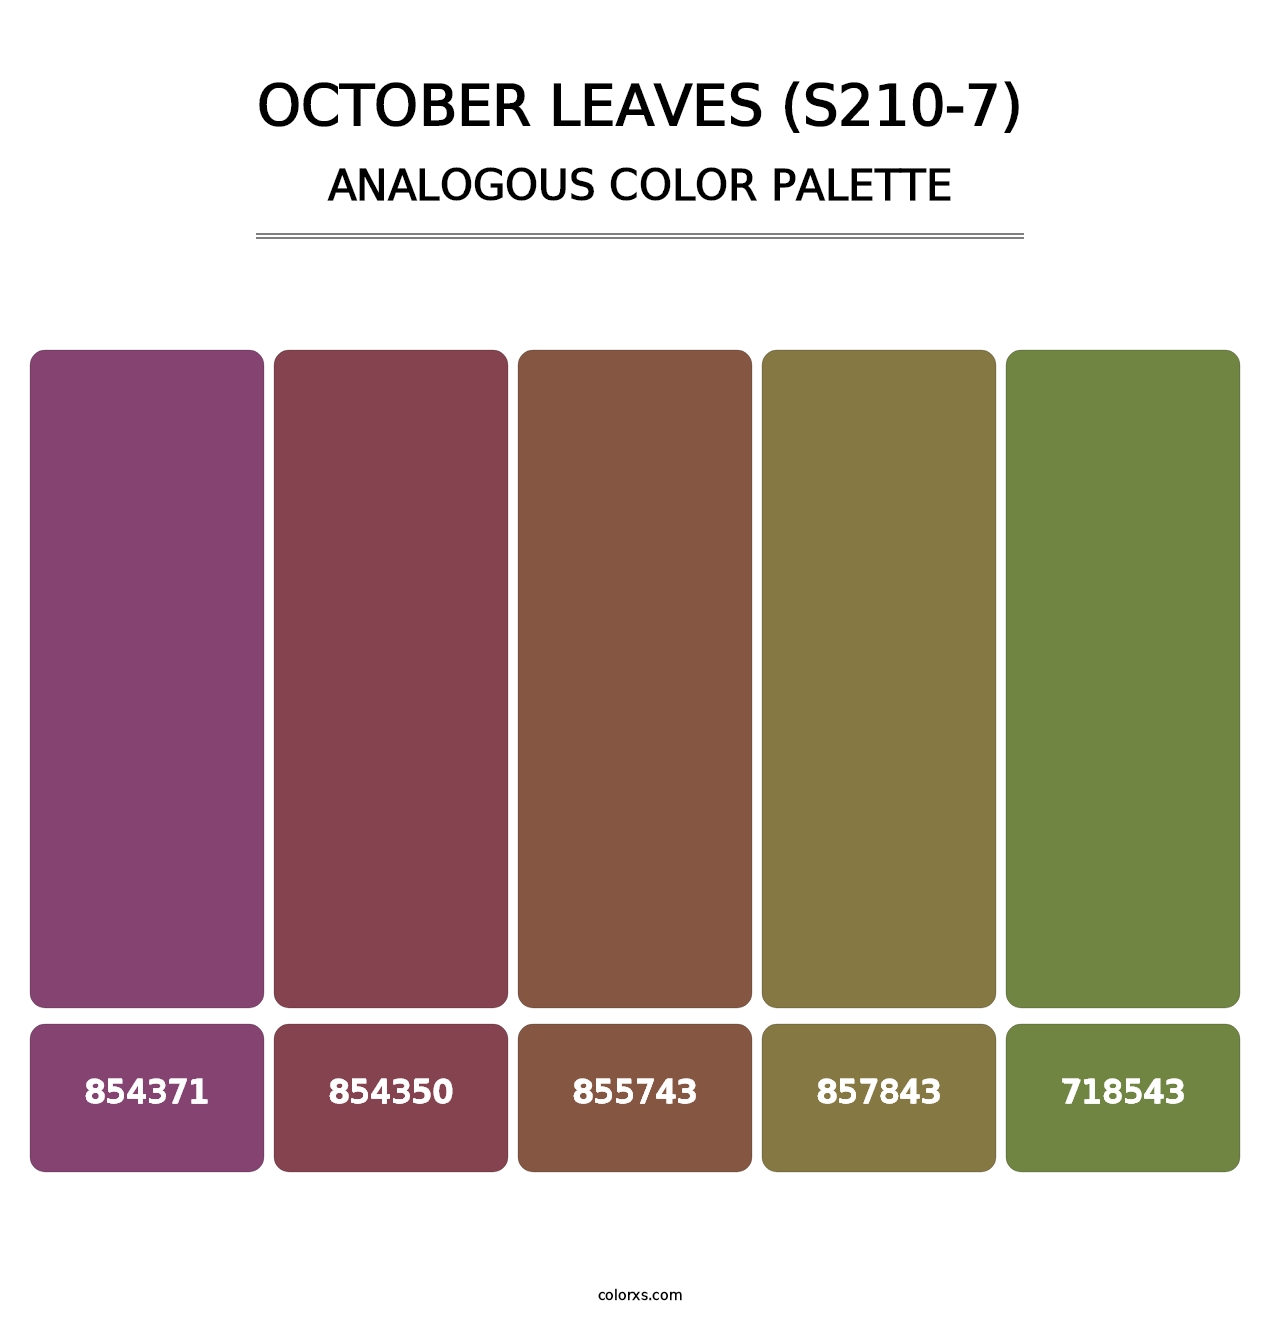 October Leaves (S210-7) - Analogous Color Palette